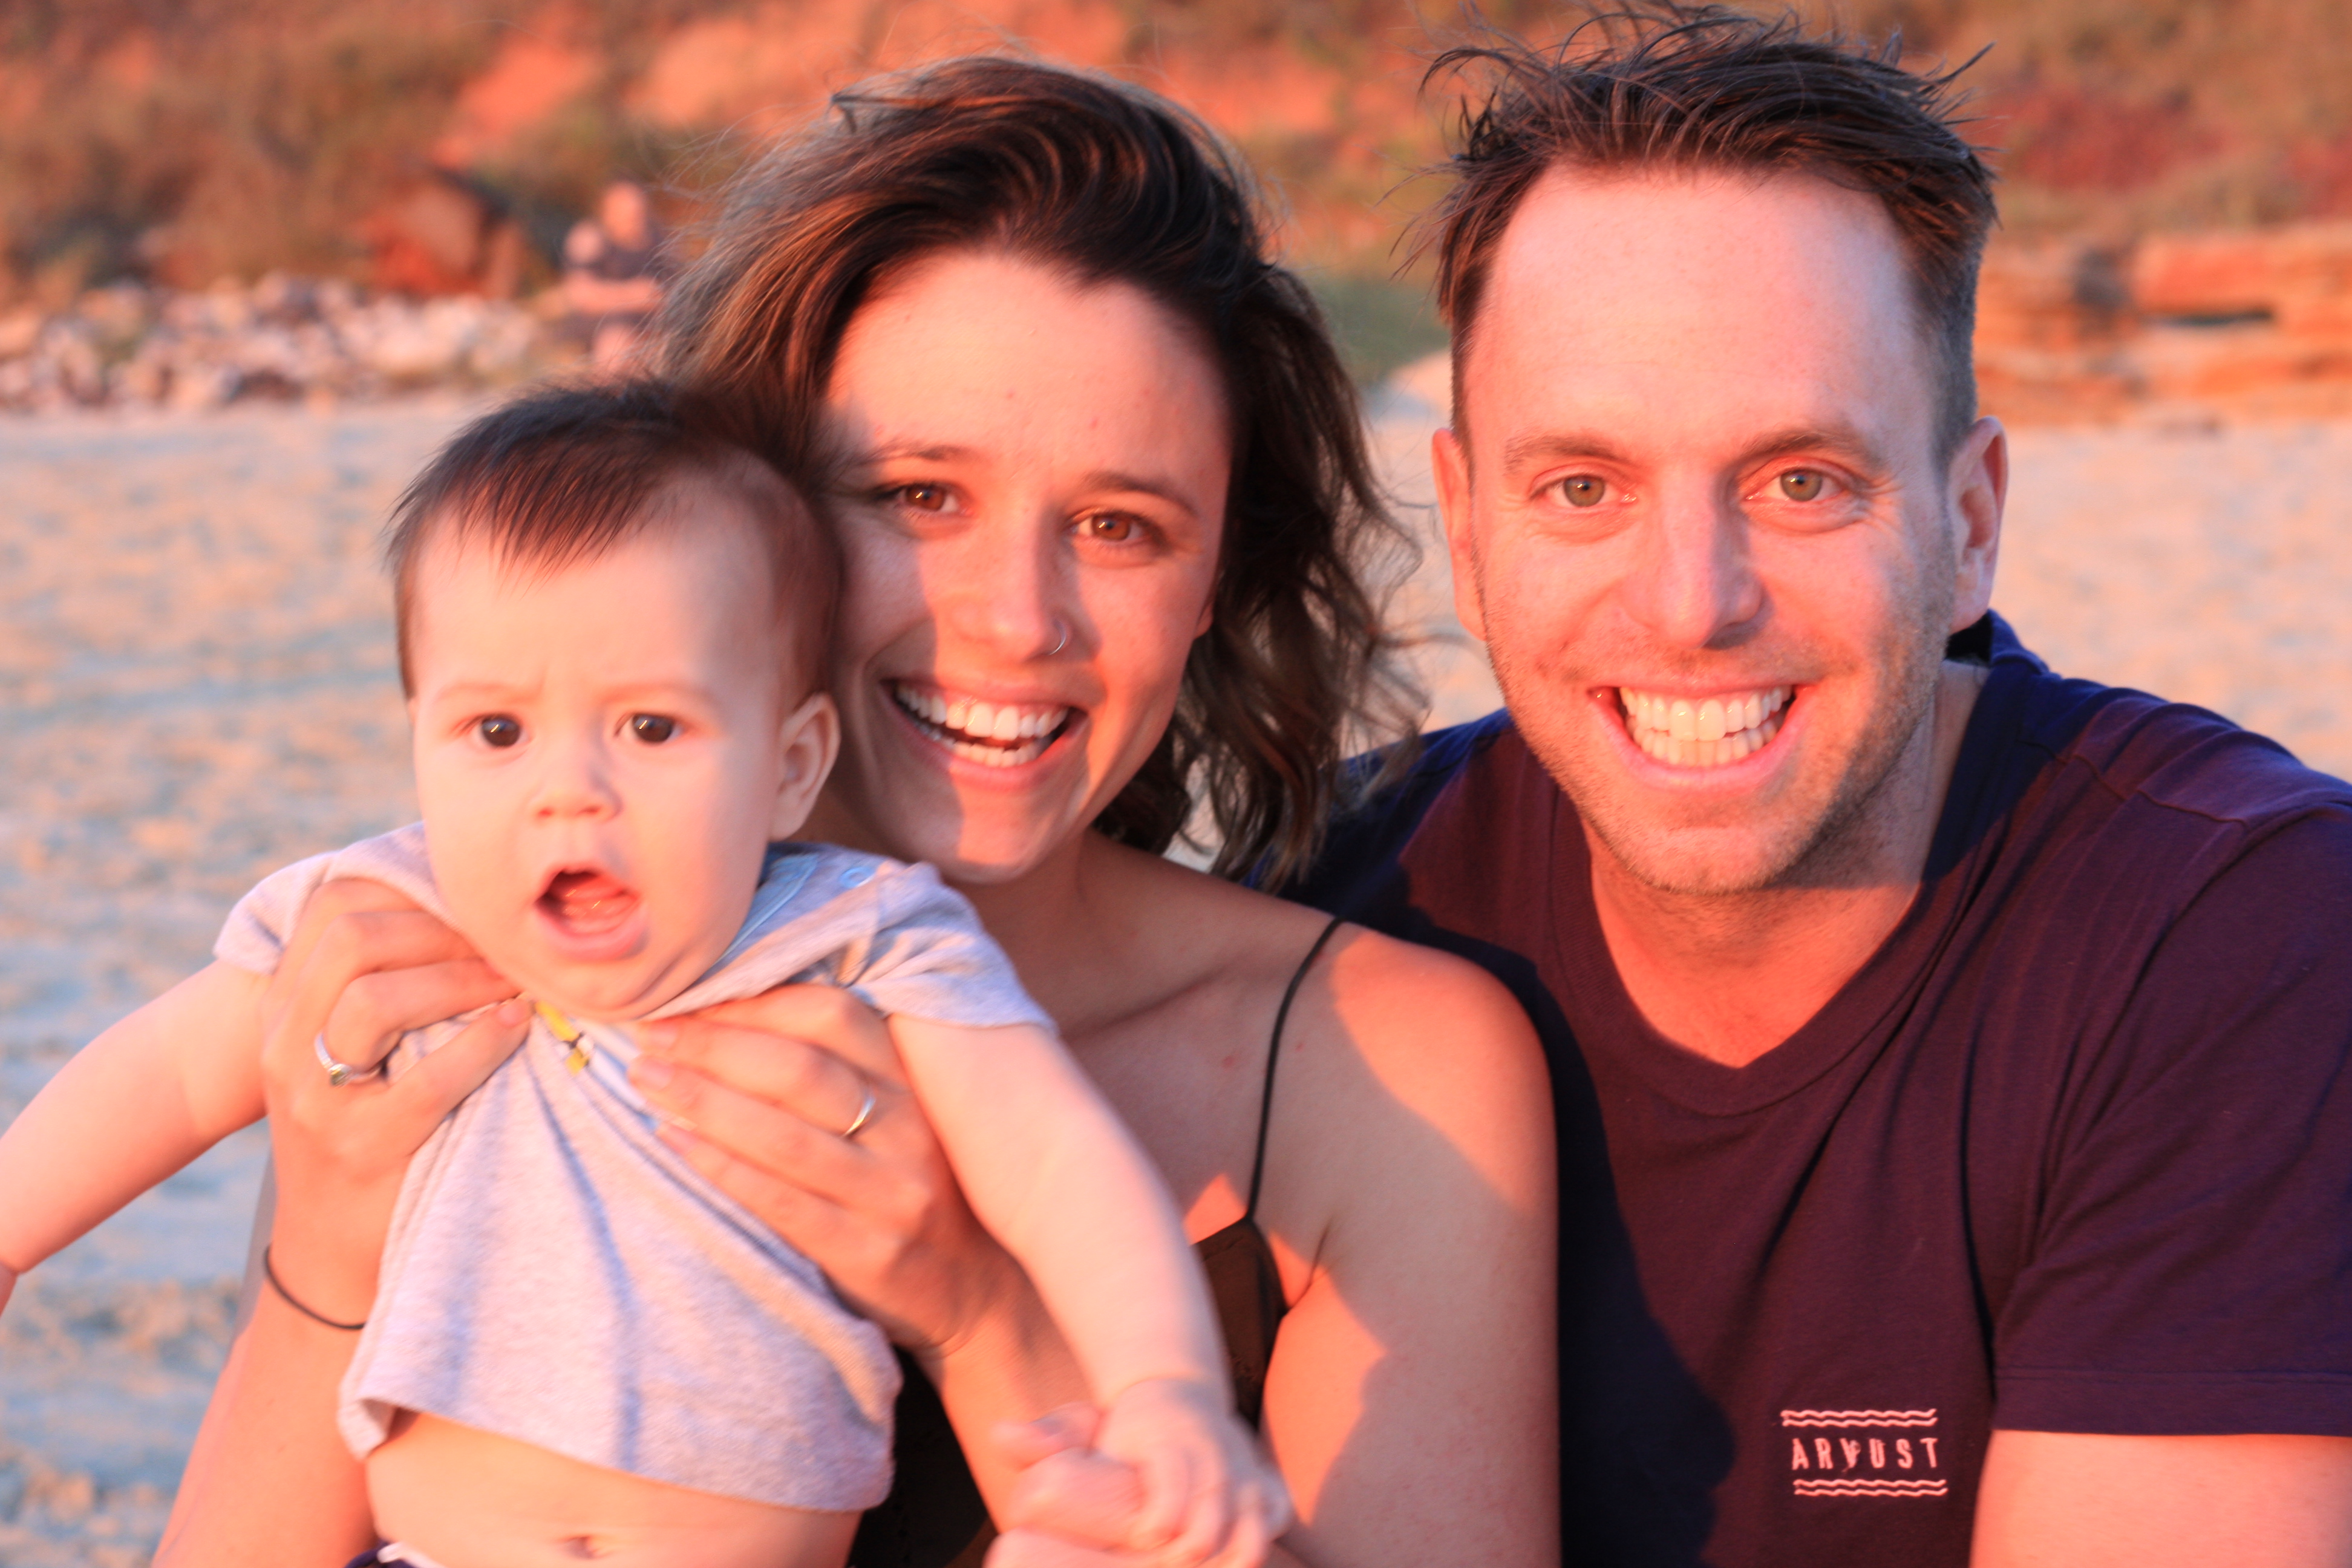 A white man and woman with dark hair sit smiling on a beach, holding a young child